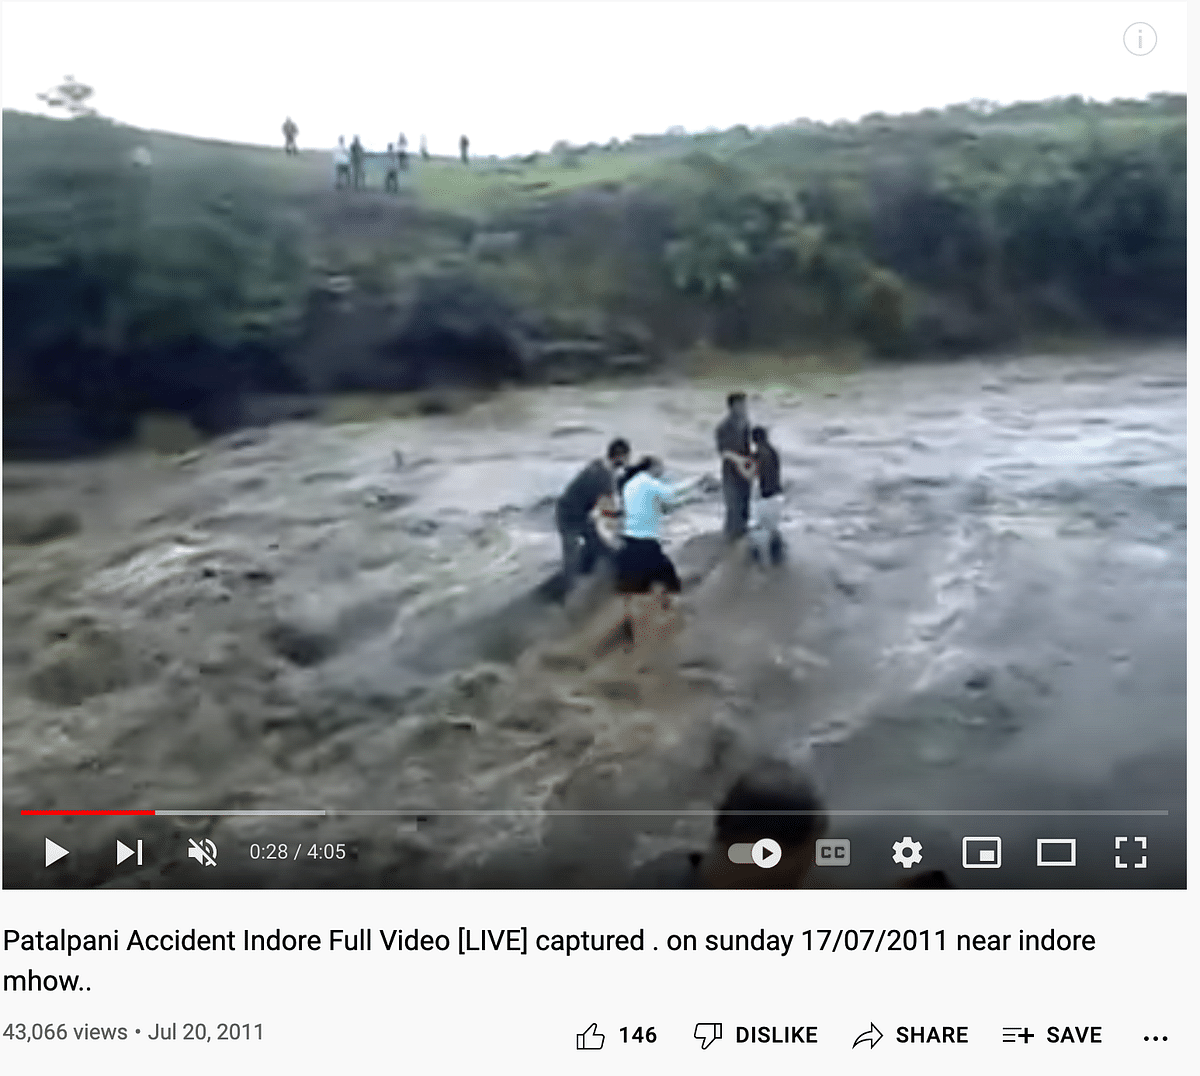 The 2011 video showed five people of a family being swept away near the Patalpani waterfall in Indore.